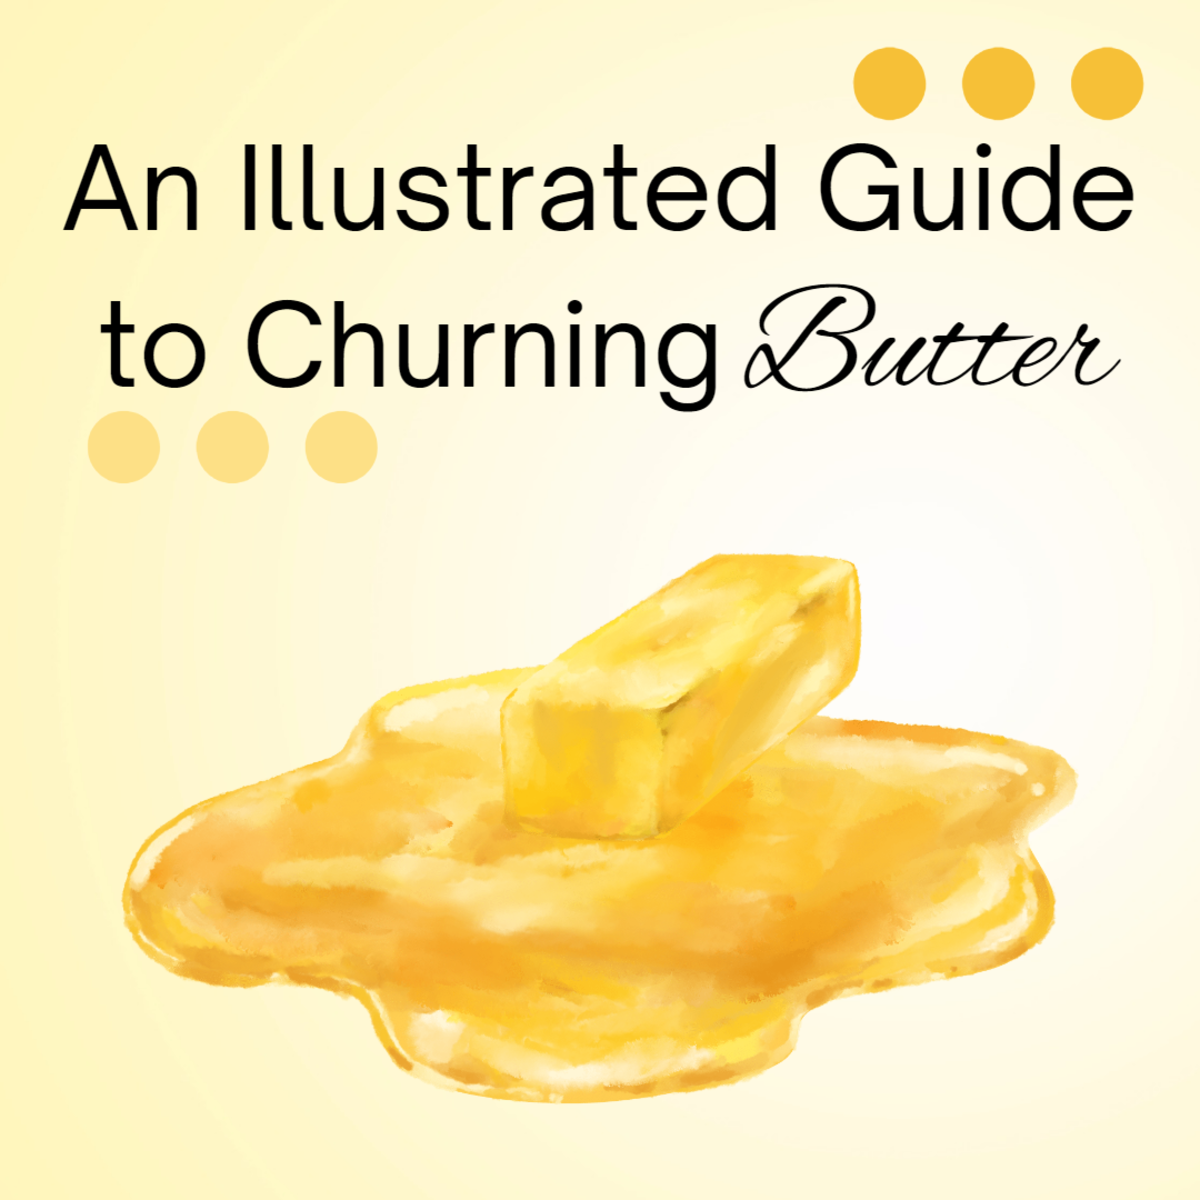 How to Make and Churn Goat Butter: An Illustrated Guide